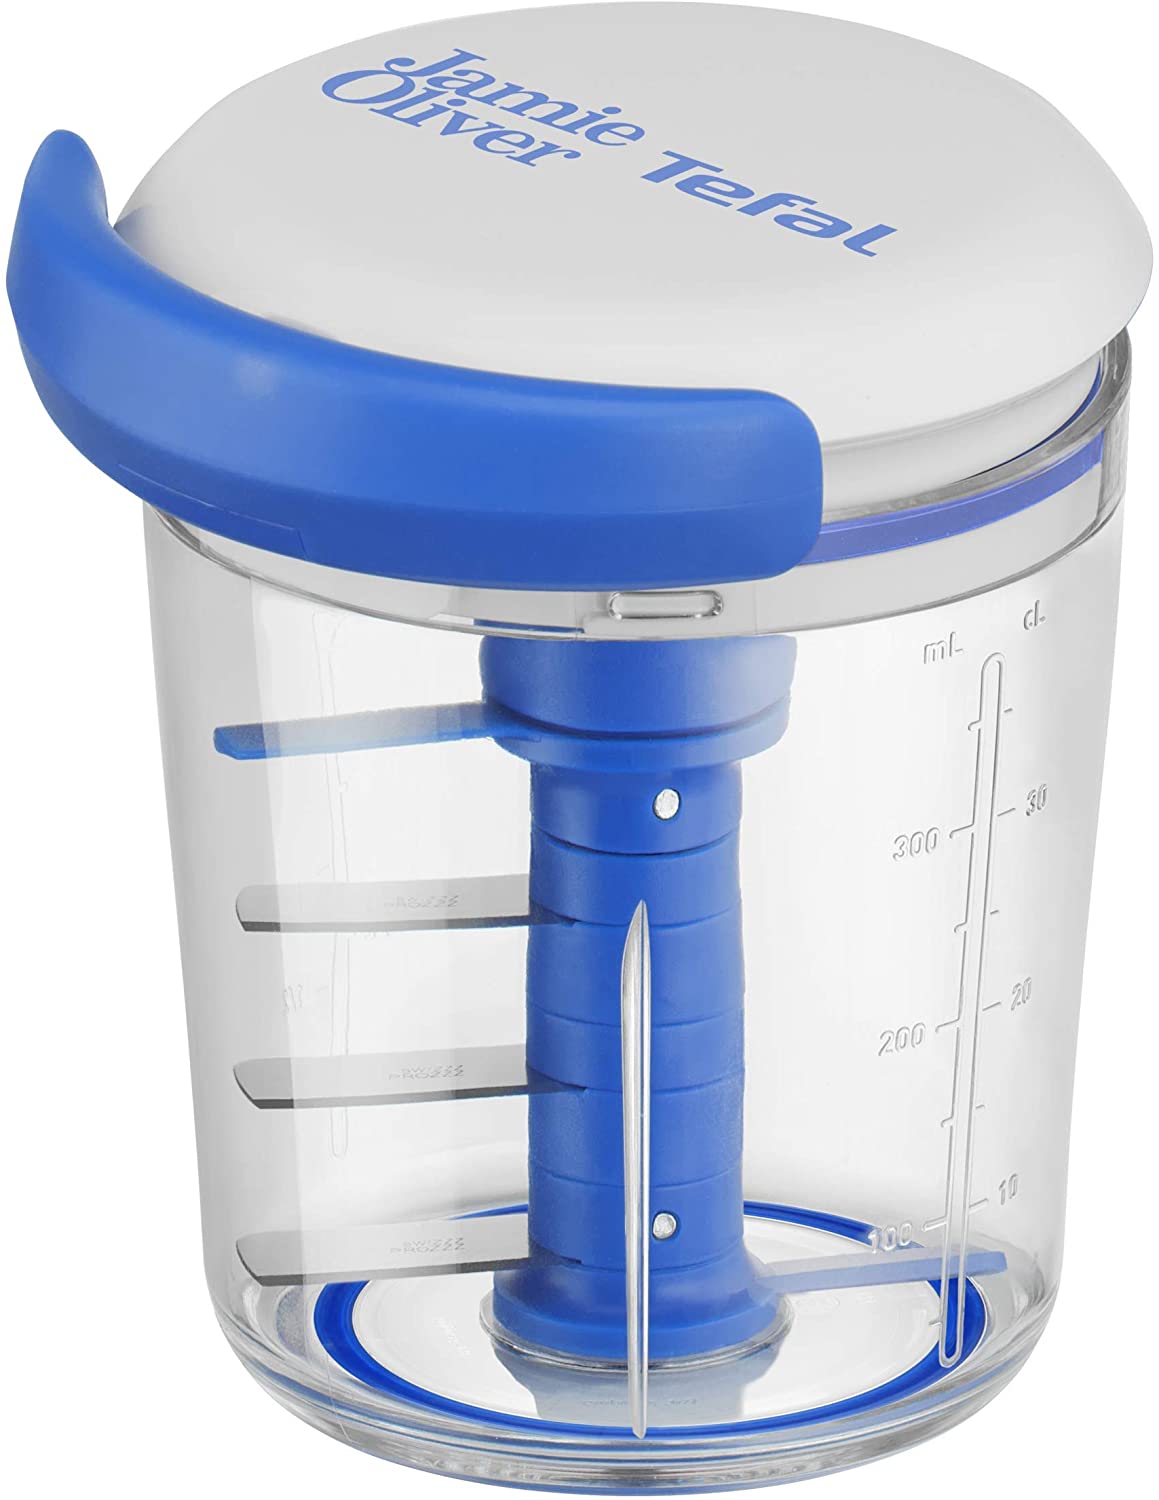 Tefal K16443 Jamie Oliver Chop & Shaker | No Electricity | Capacity: 450 ml | Multi Chopper | Universal Chopper for Vegetables, Fruits, Onions, Nuts, Garlic | White/Blue